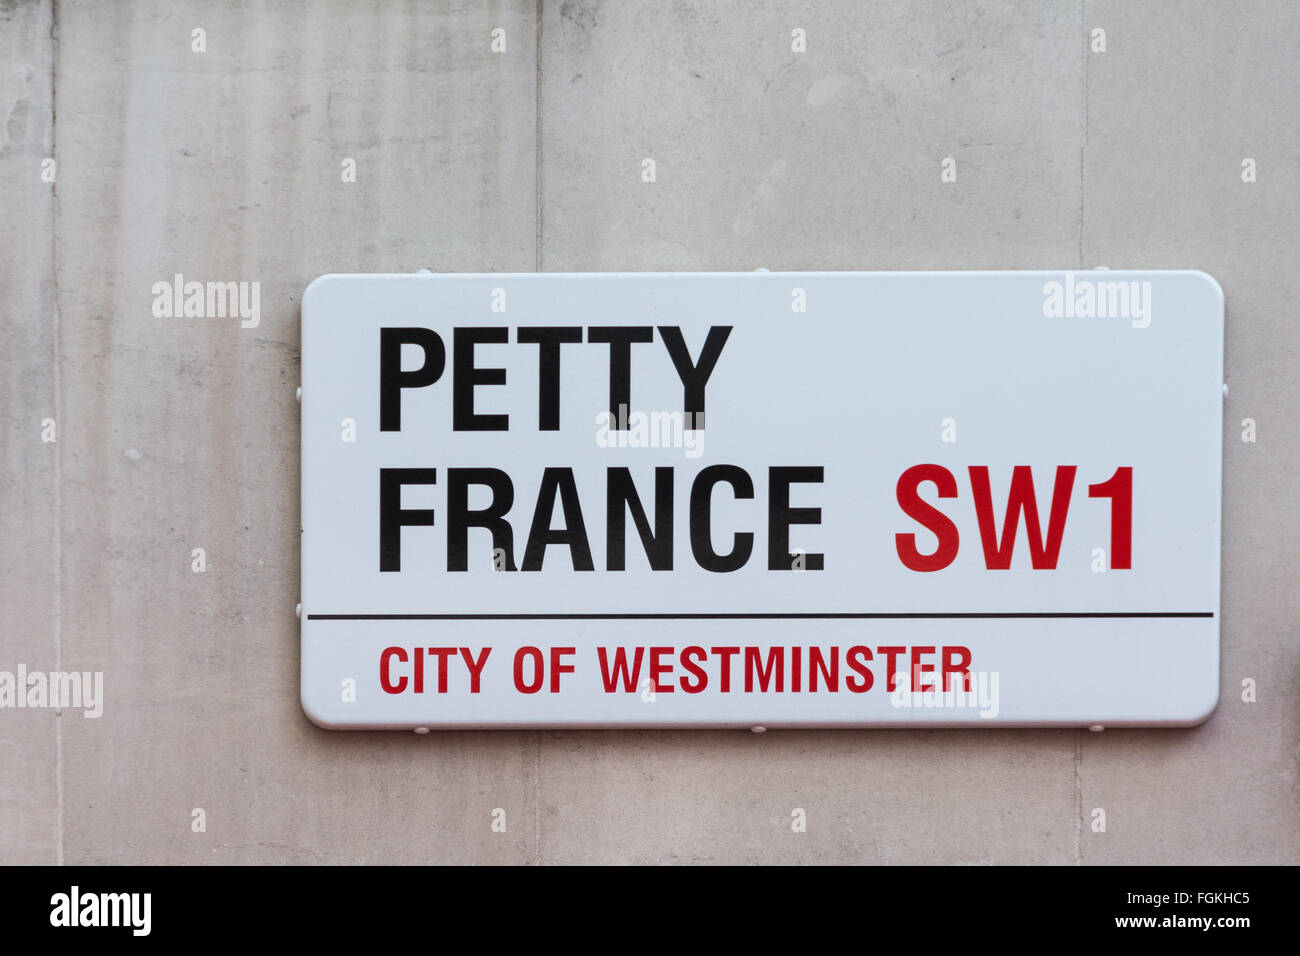 St Jame's Park Station in Petty Francia, London, Westminster SW1 Foto Stock